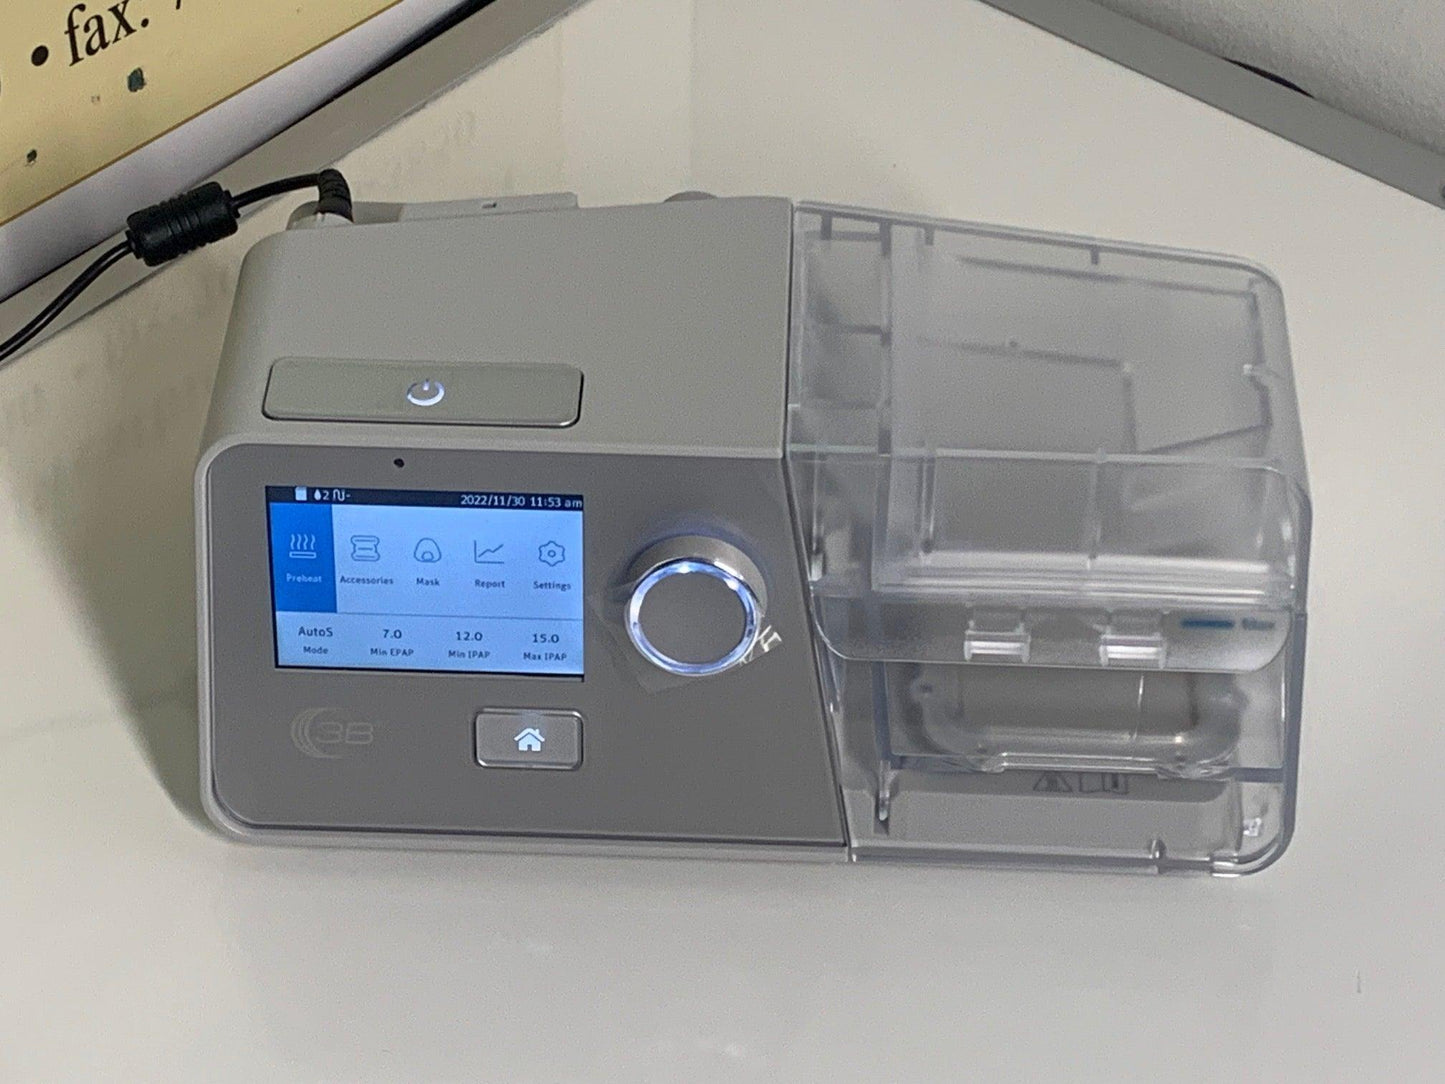 NEW 3B Luna G3 25A Auto-BiPAP Machine Package with Heated Humidifier - MBR Medicals